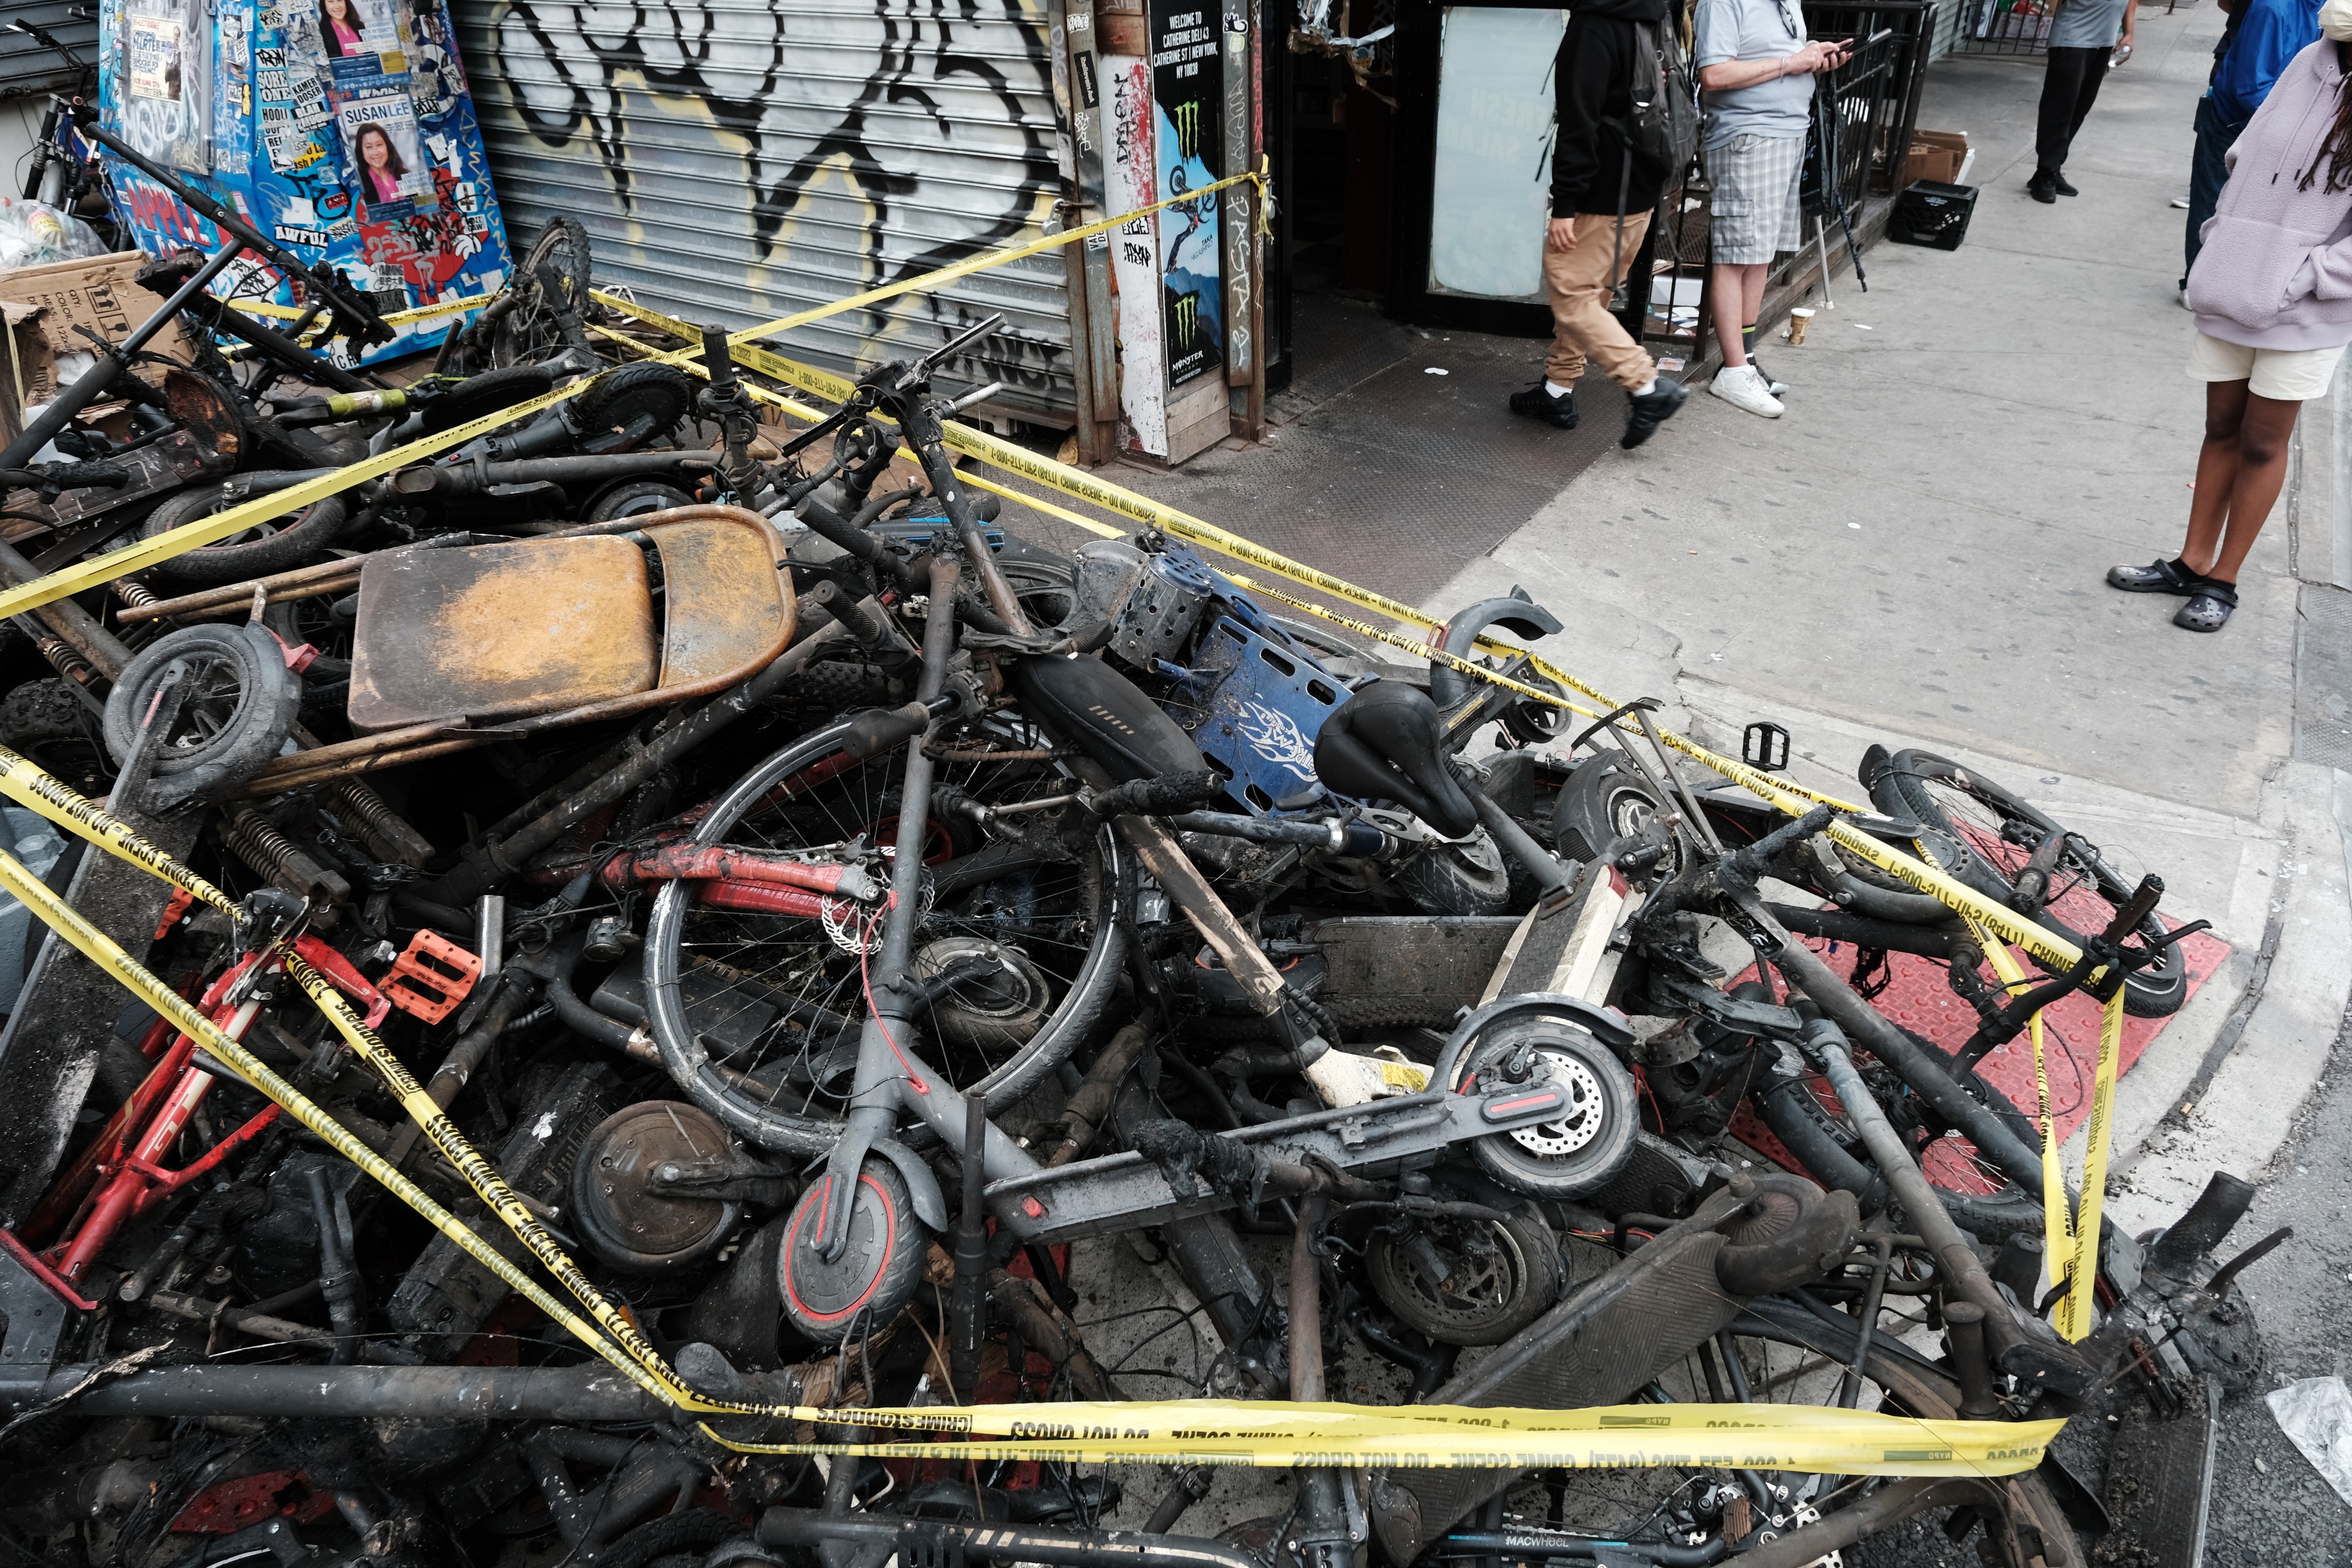 Charred e-scooters and e-bikes stacked in a pile.